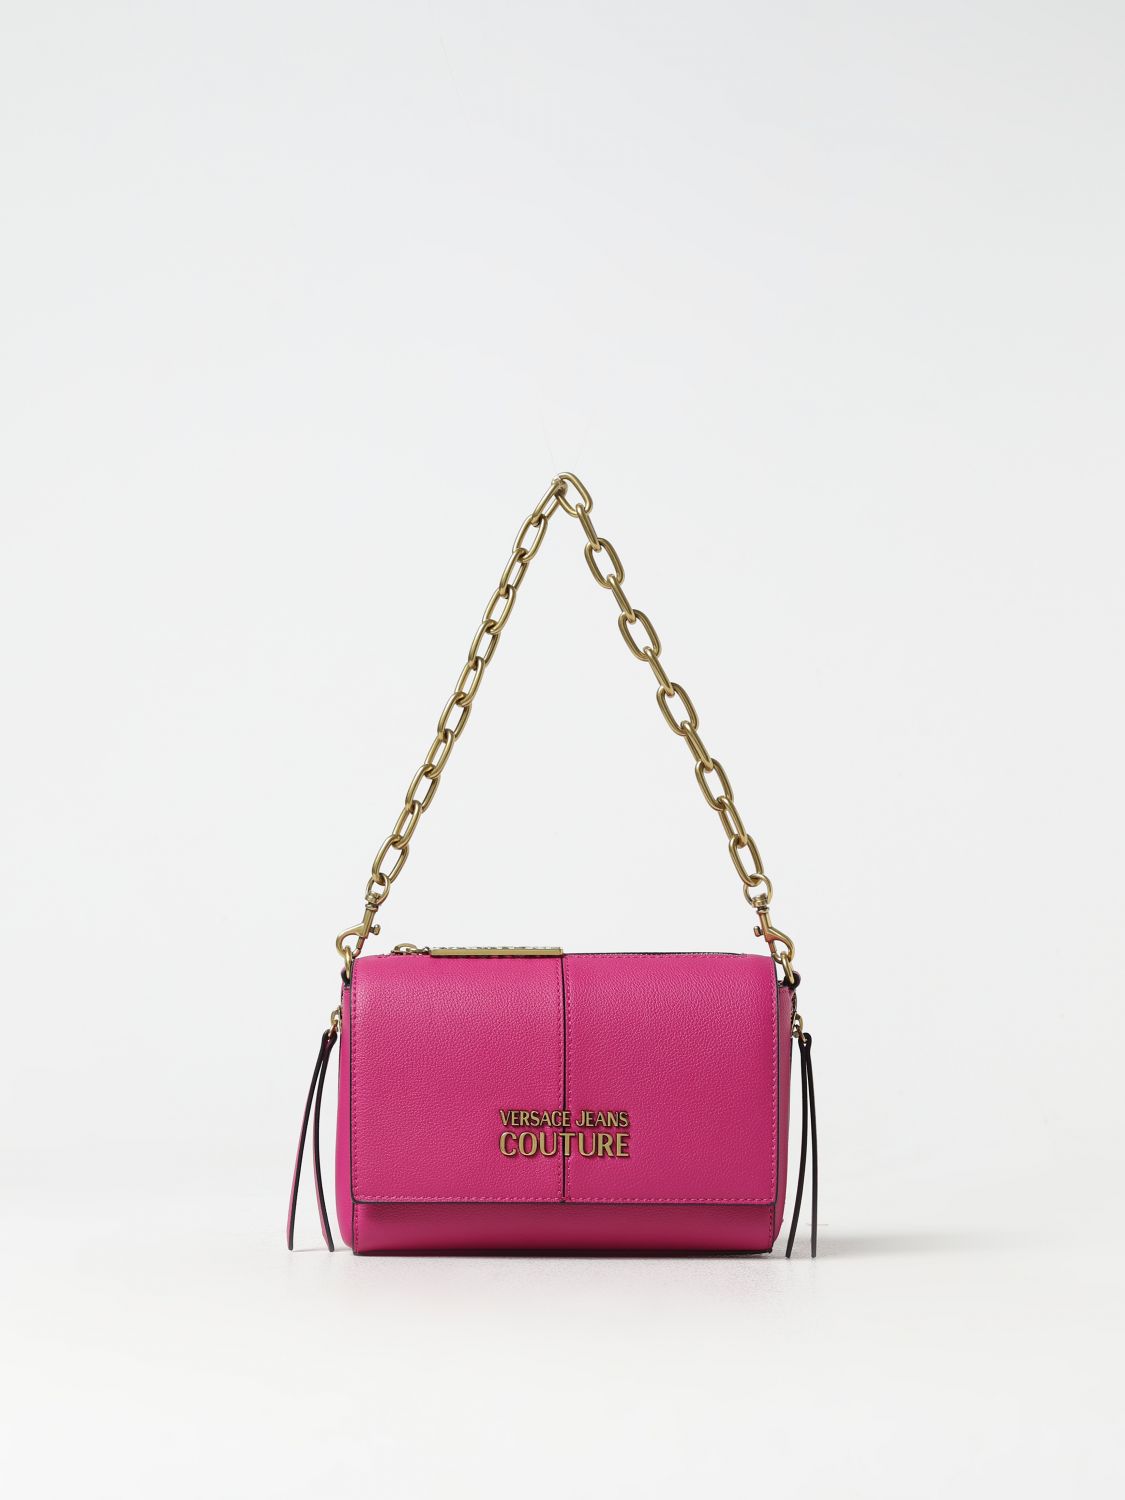 Versace Jeans Couture bag - VERSACE JEANS - Tufano Moda